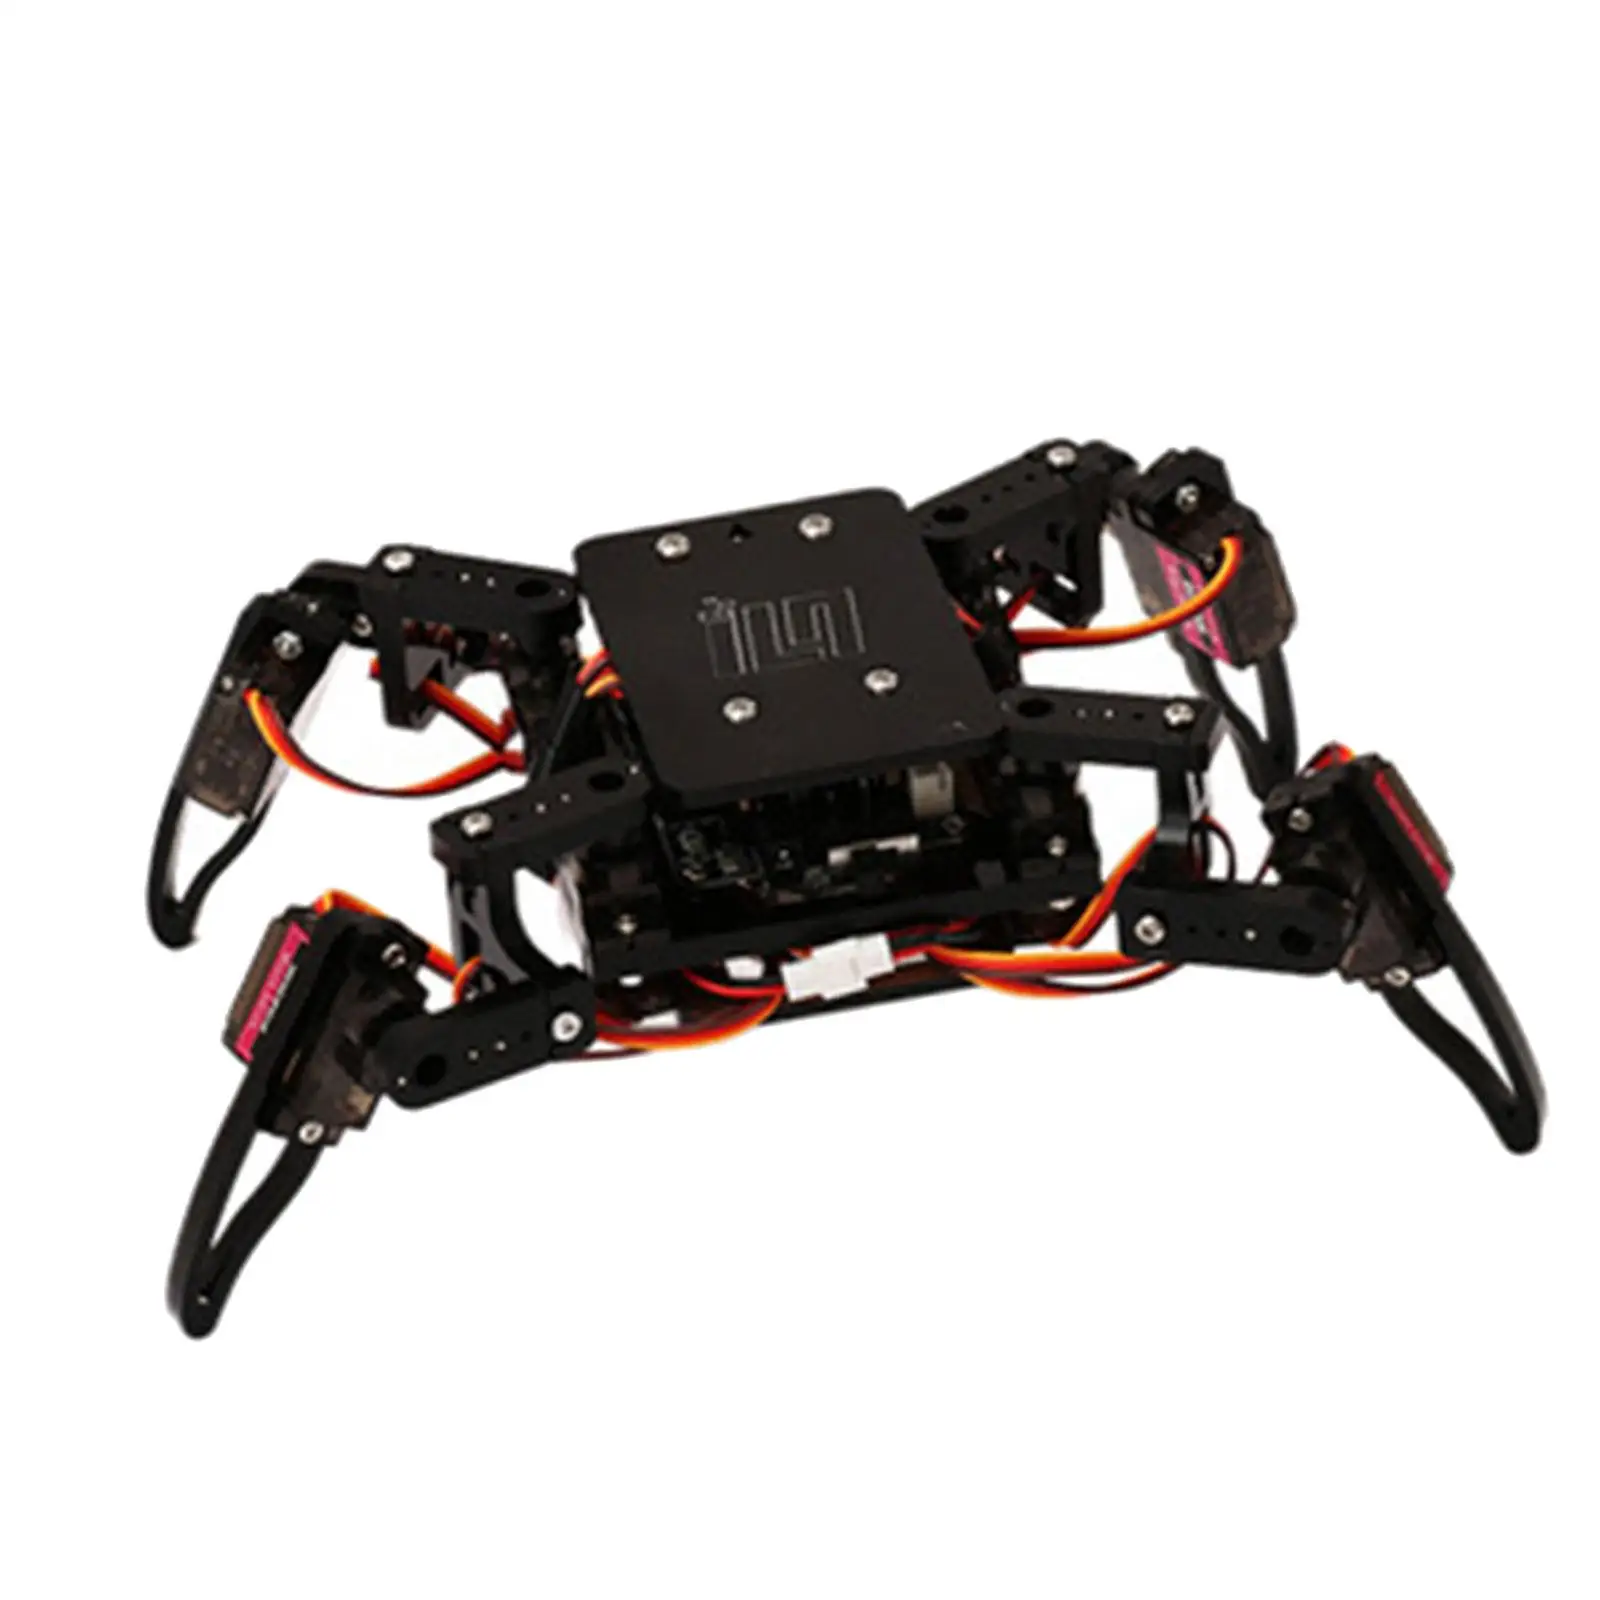 DIY Quadruped Robot Kits Lightweight Educational Scientific Building Kits for Electronic Competition Teaching Aids Teens Adults